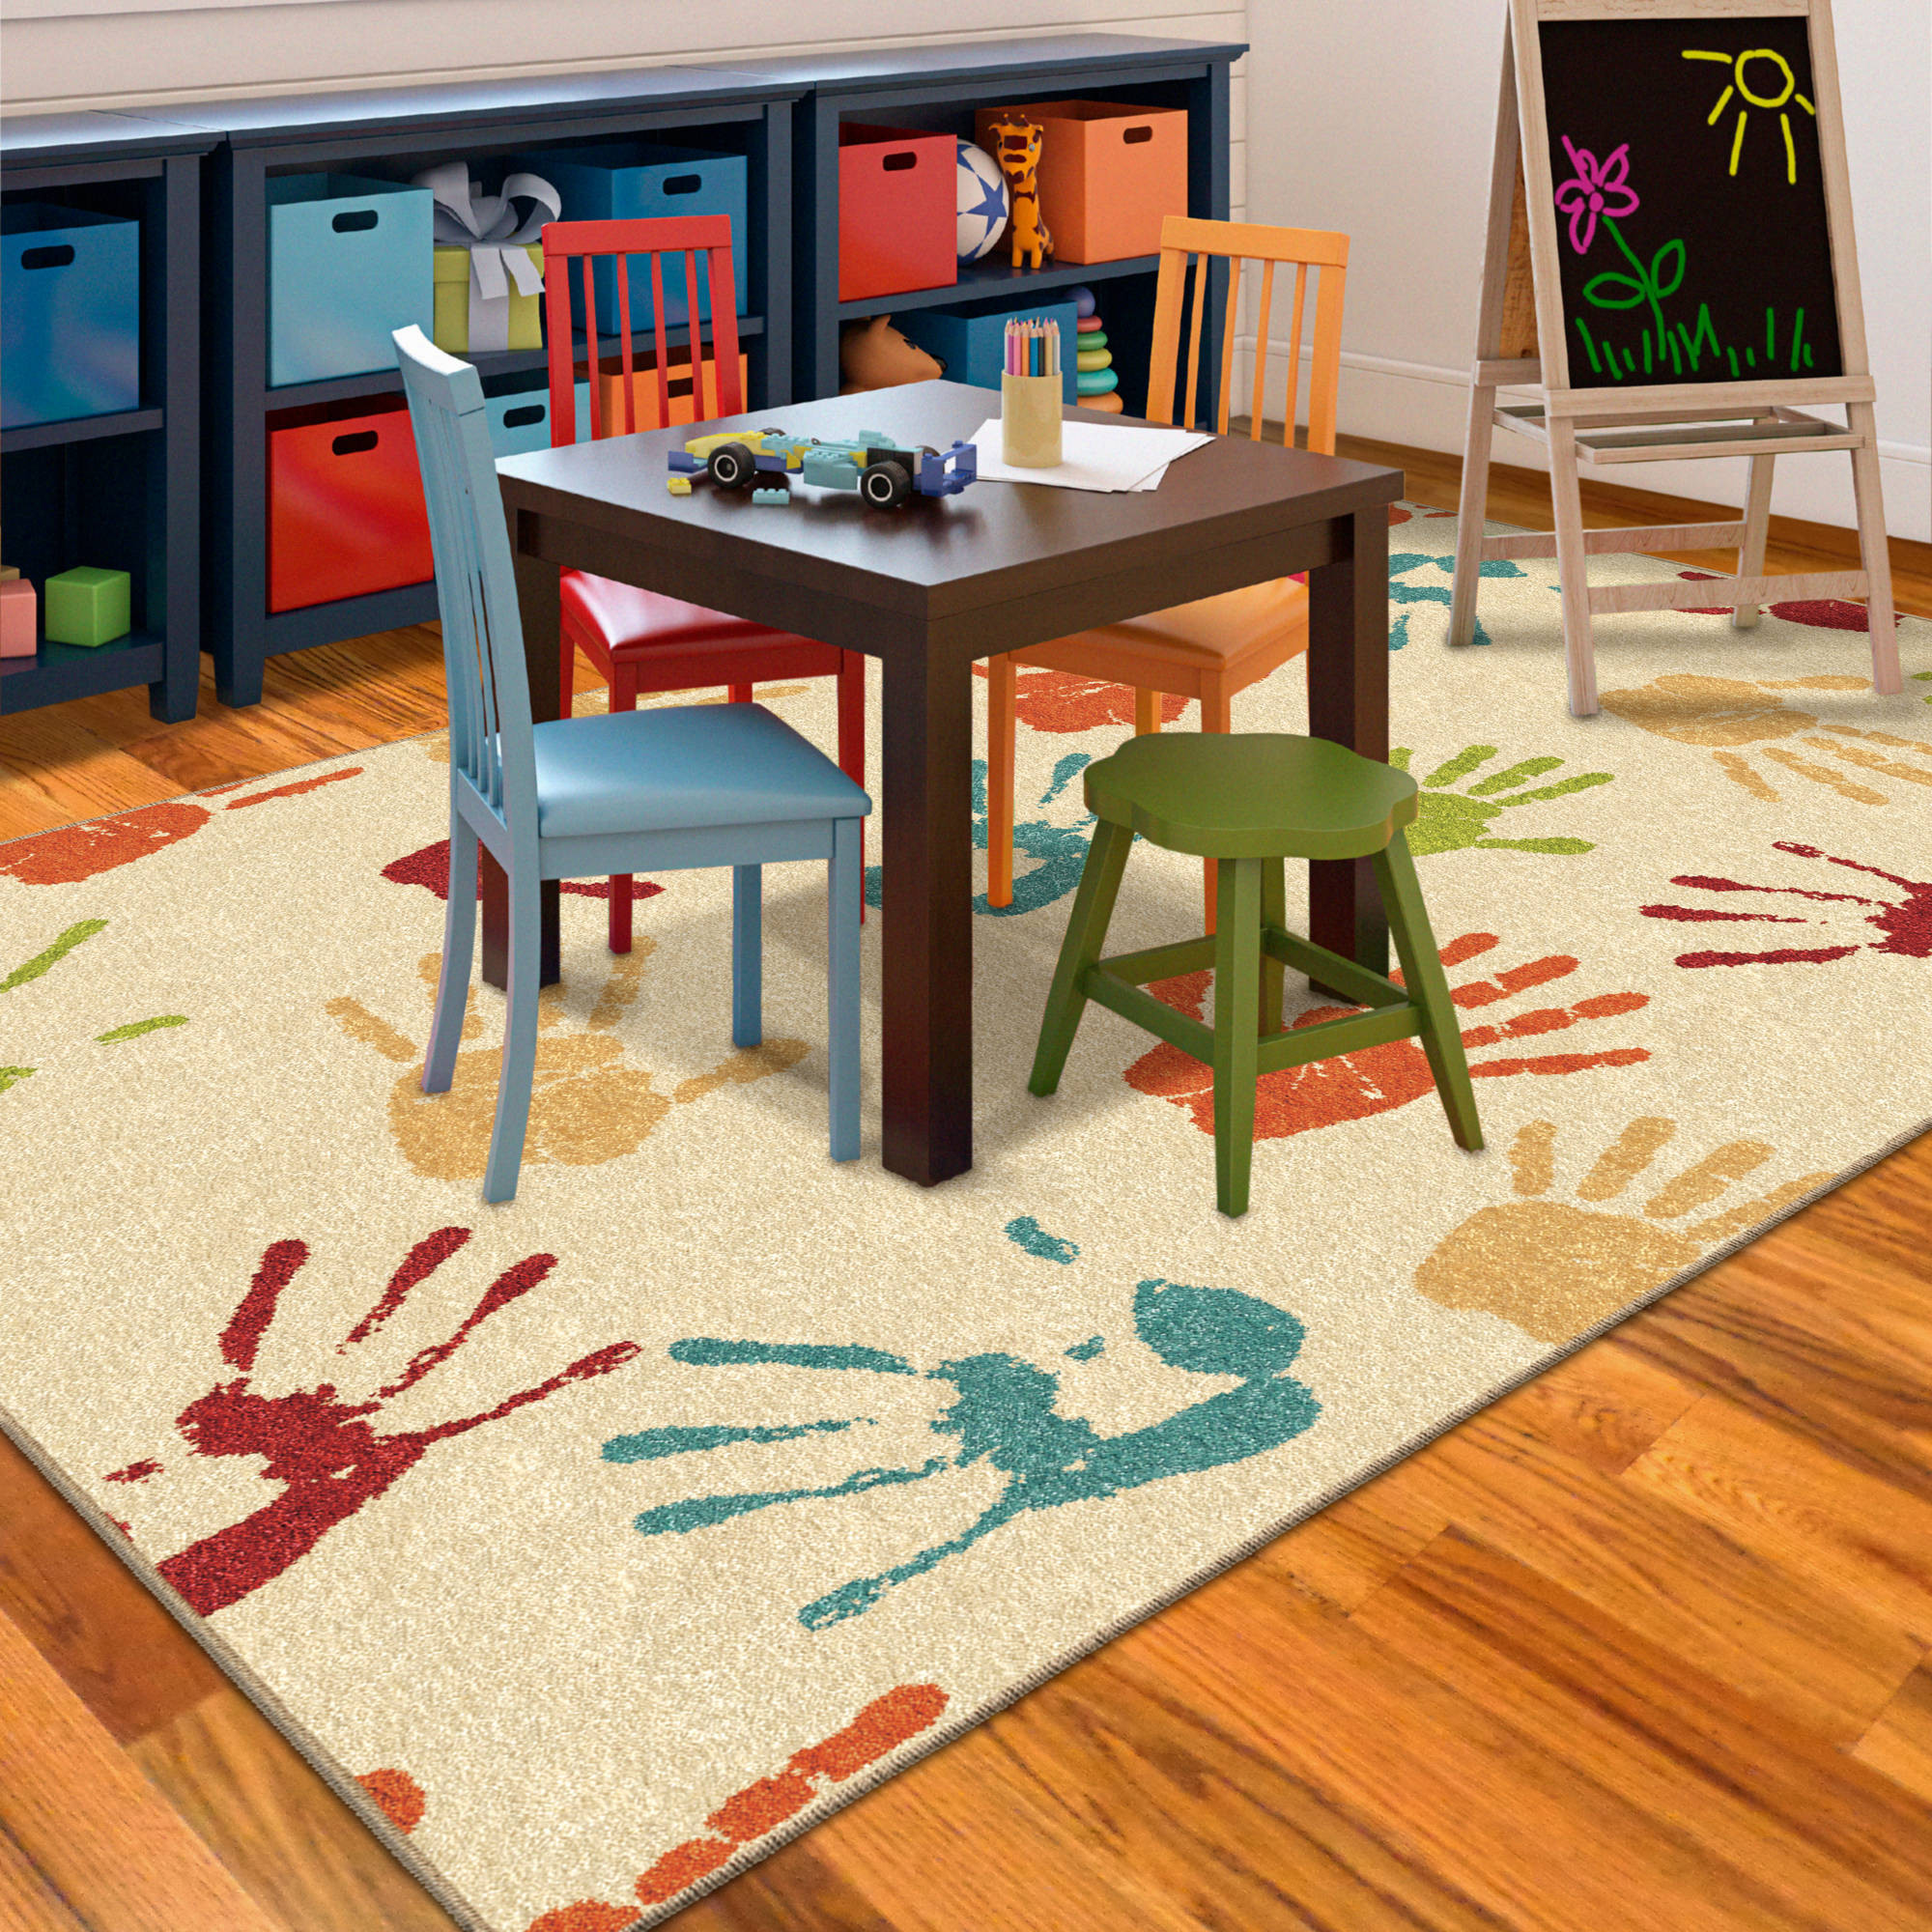 Rugs For Kids Room
 5 Things to Think About When Choosing Kids Playroom Rugs